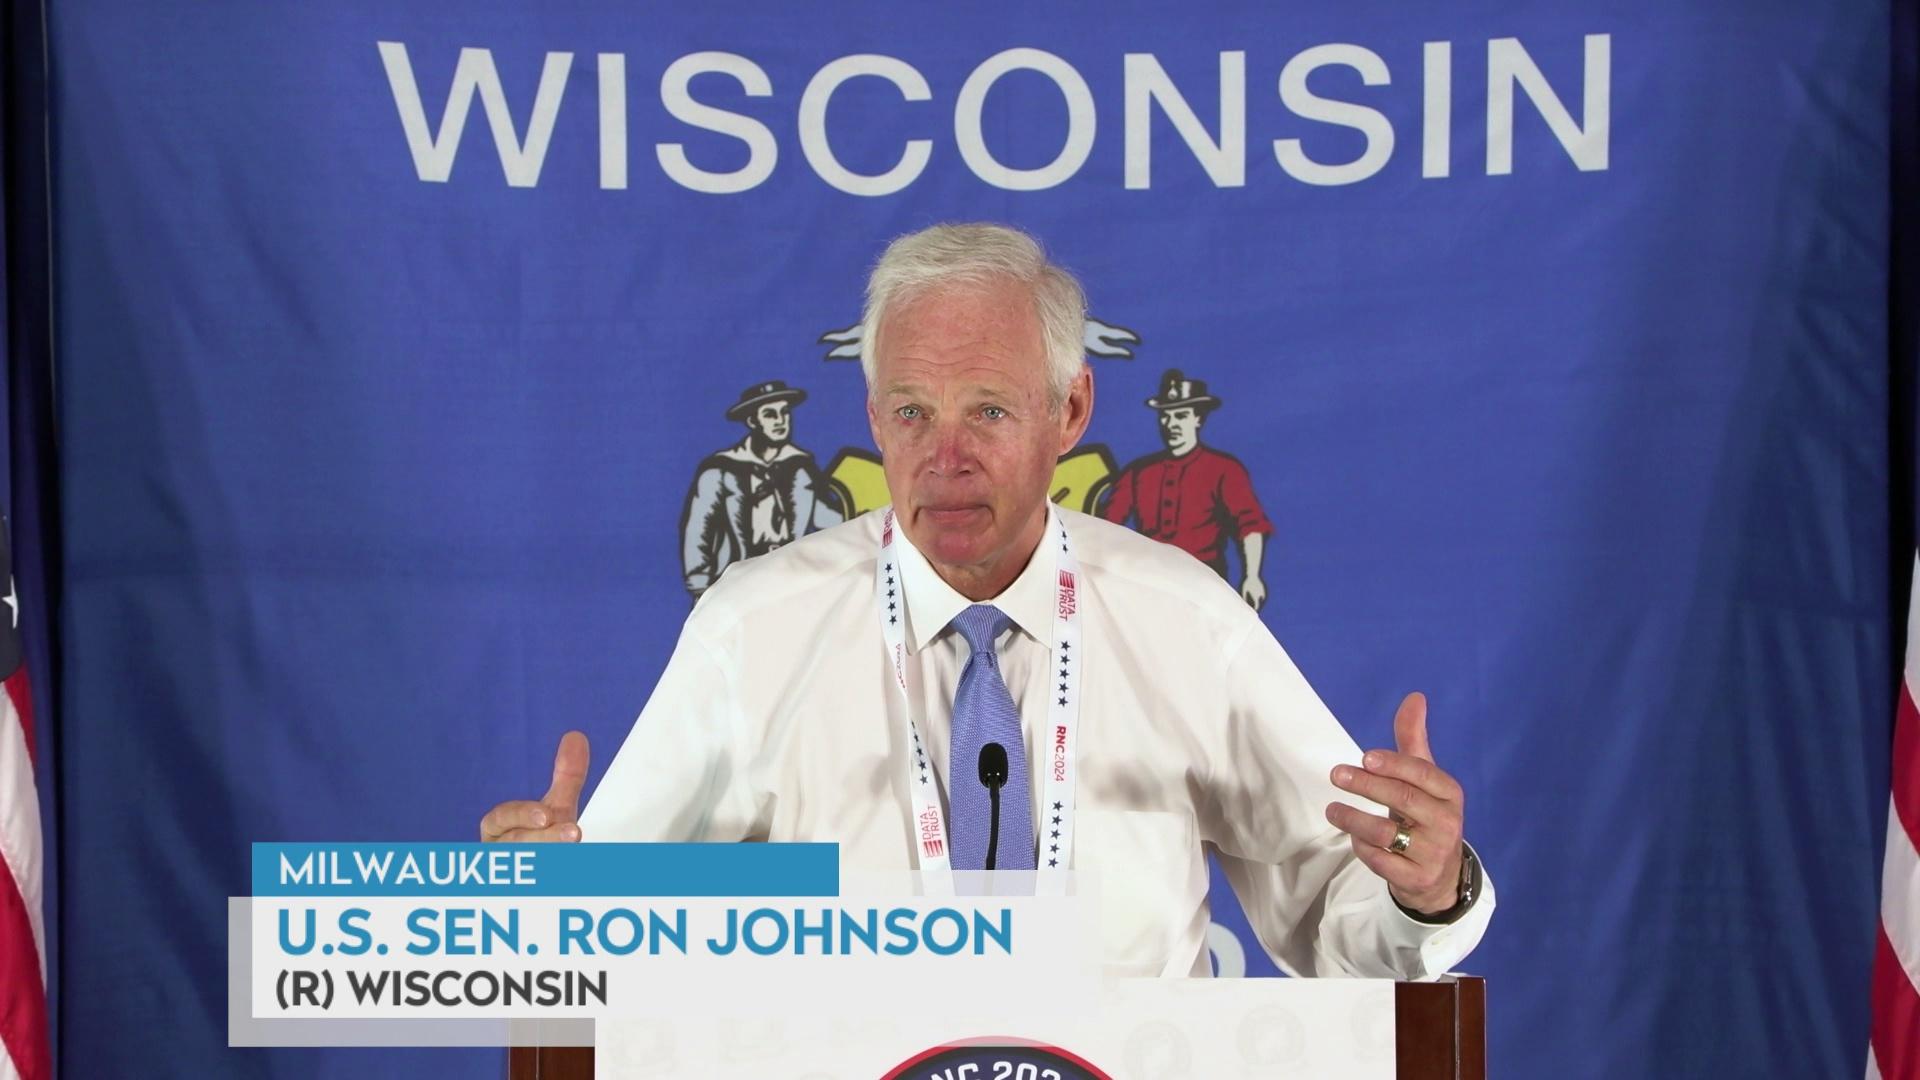 Ron Johnson stands in front of the Wisconsin flag.